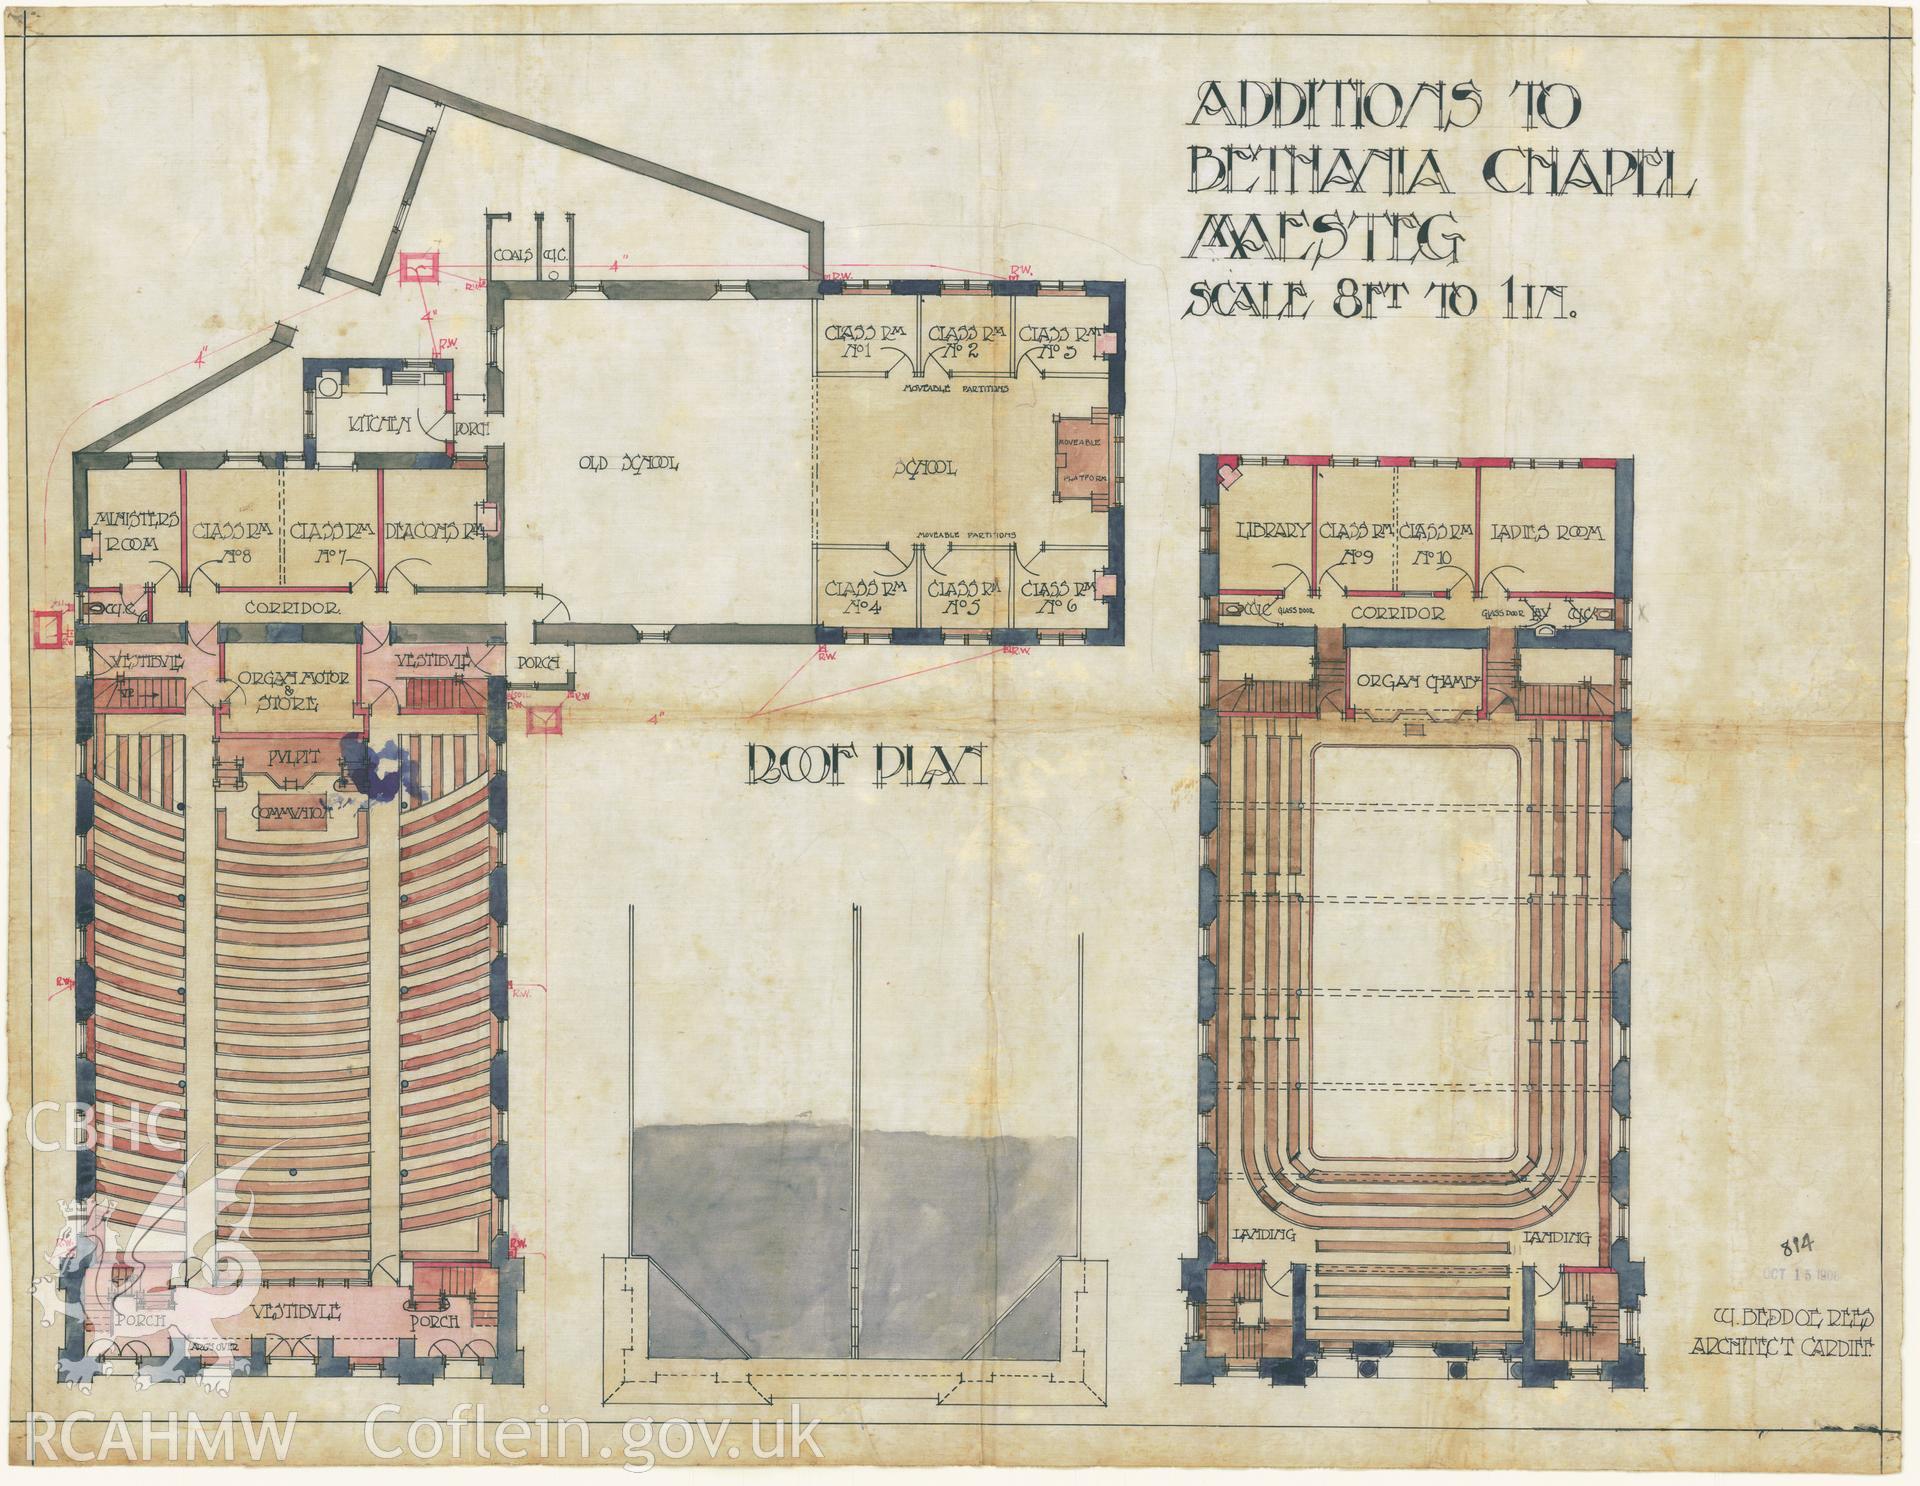 Digitized copy of a coloured pen and ink drawing by W. Beddoe Rees, dated 1906, showing general layout and roof plan of Bethania Chapel, Maesteg. One of a set of original architectural drawings of Bethania Chapel, Maesteg, loaned for copying by their owners, the Welsh Religious Buildings Trust. The original drawings are held by the Glamorgan Record Office.